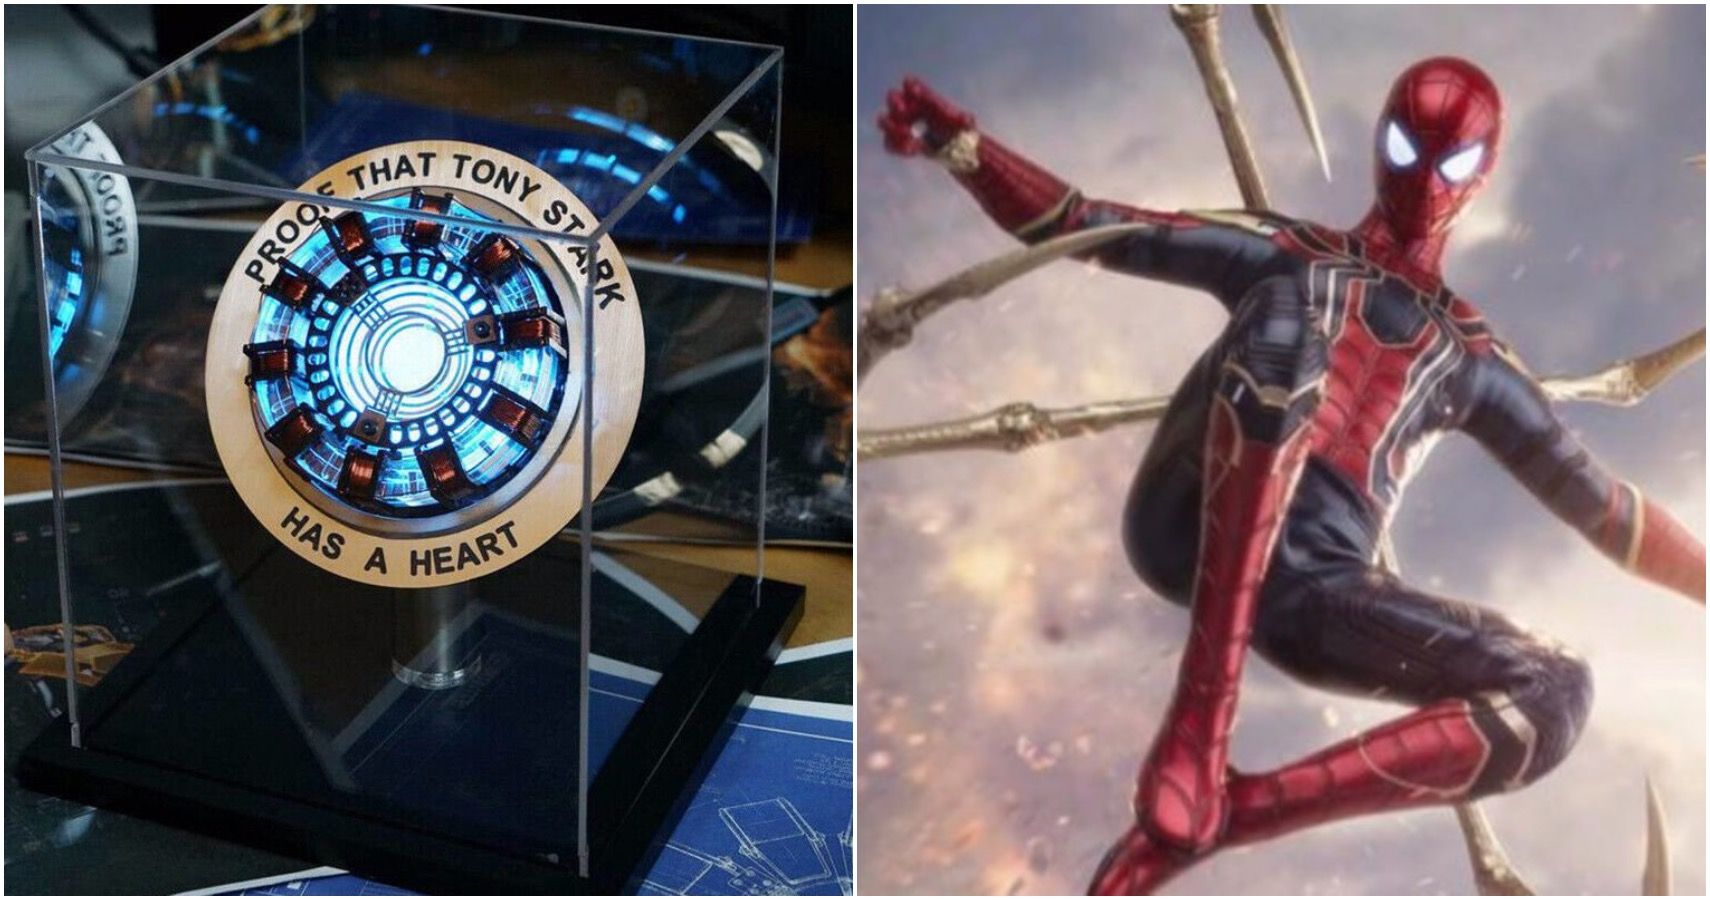 Marvel-Inspired Inventions Could Change the World